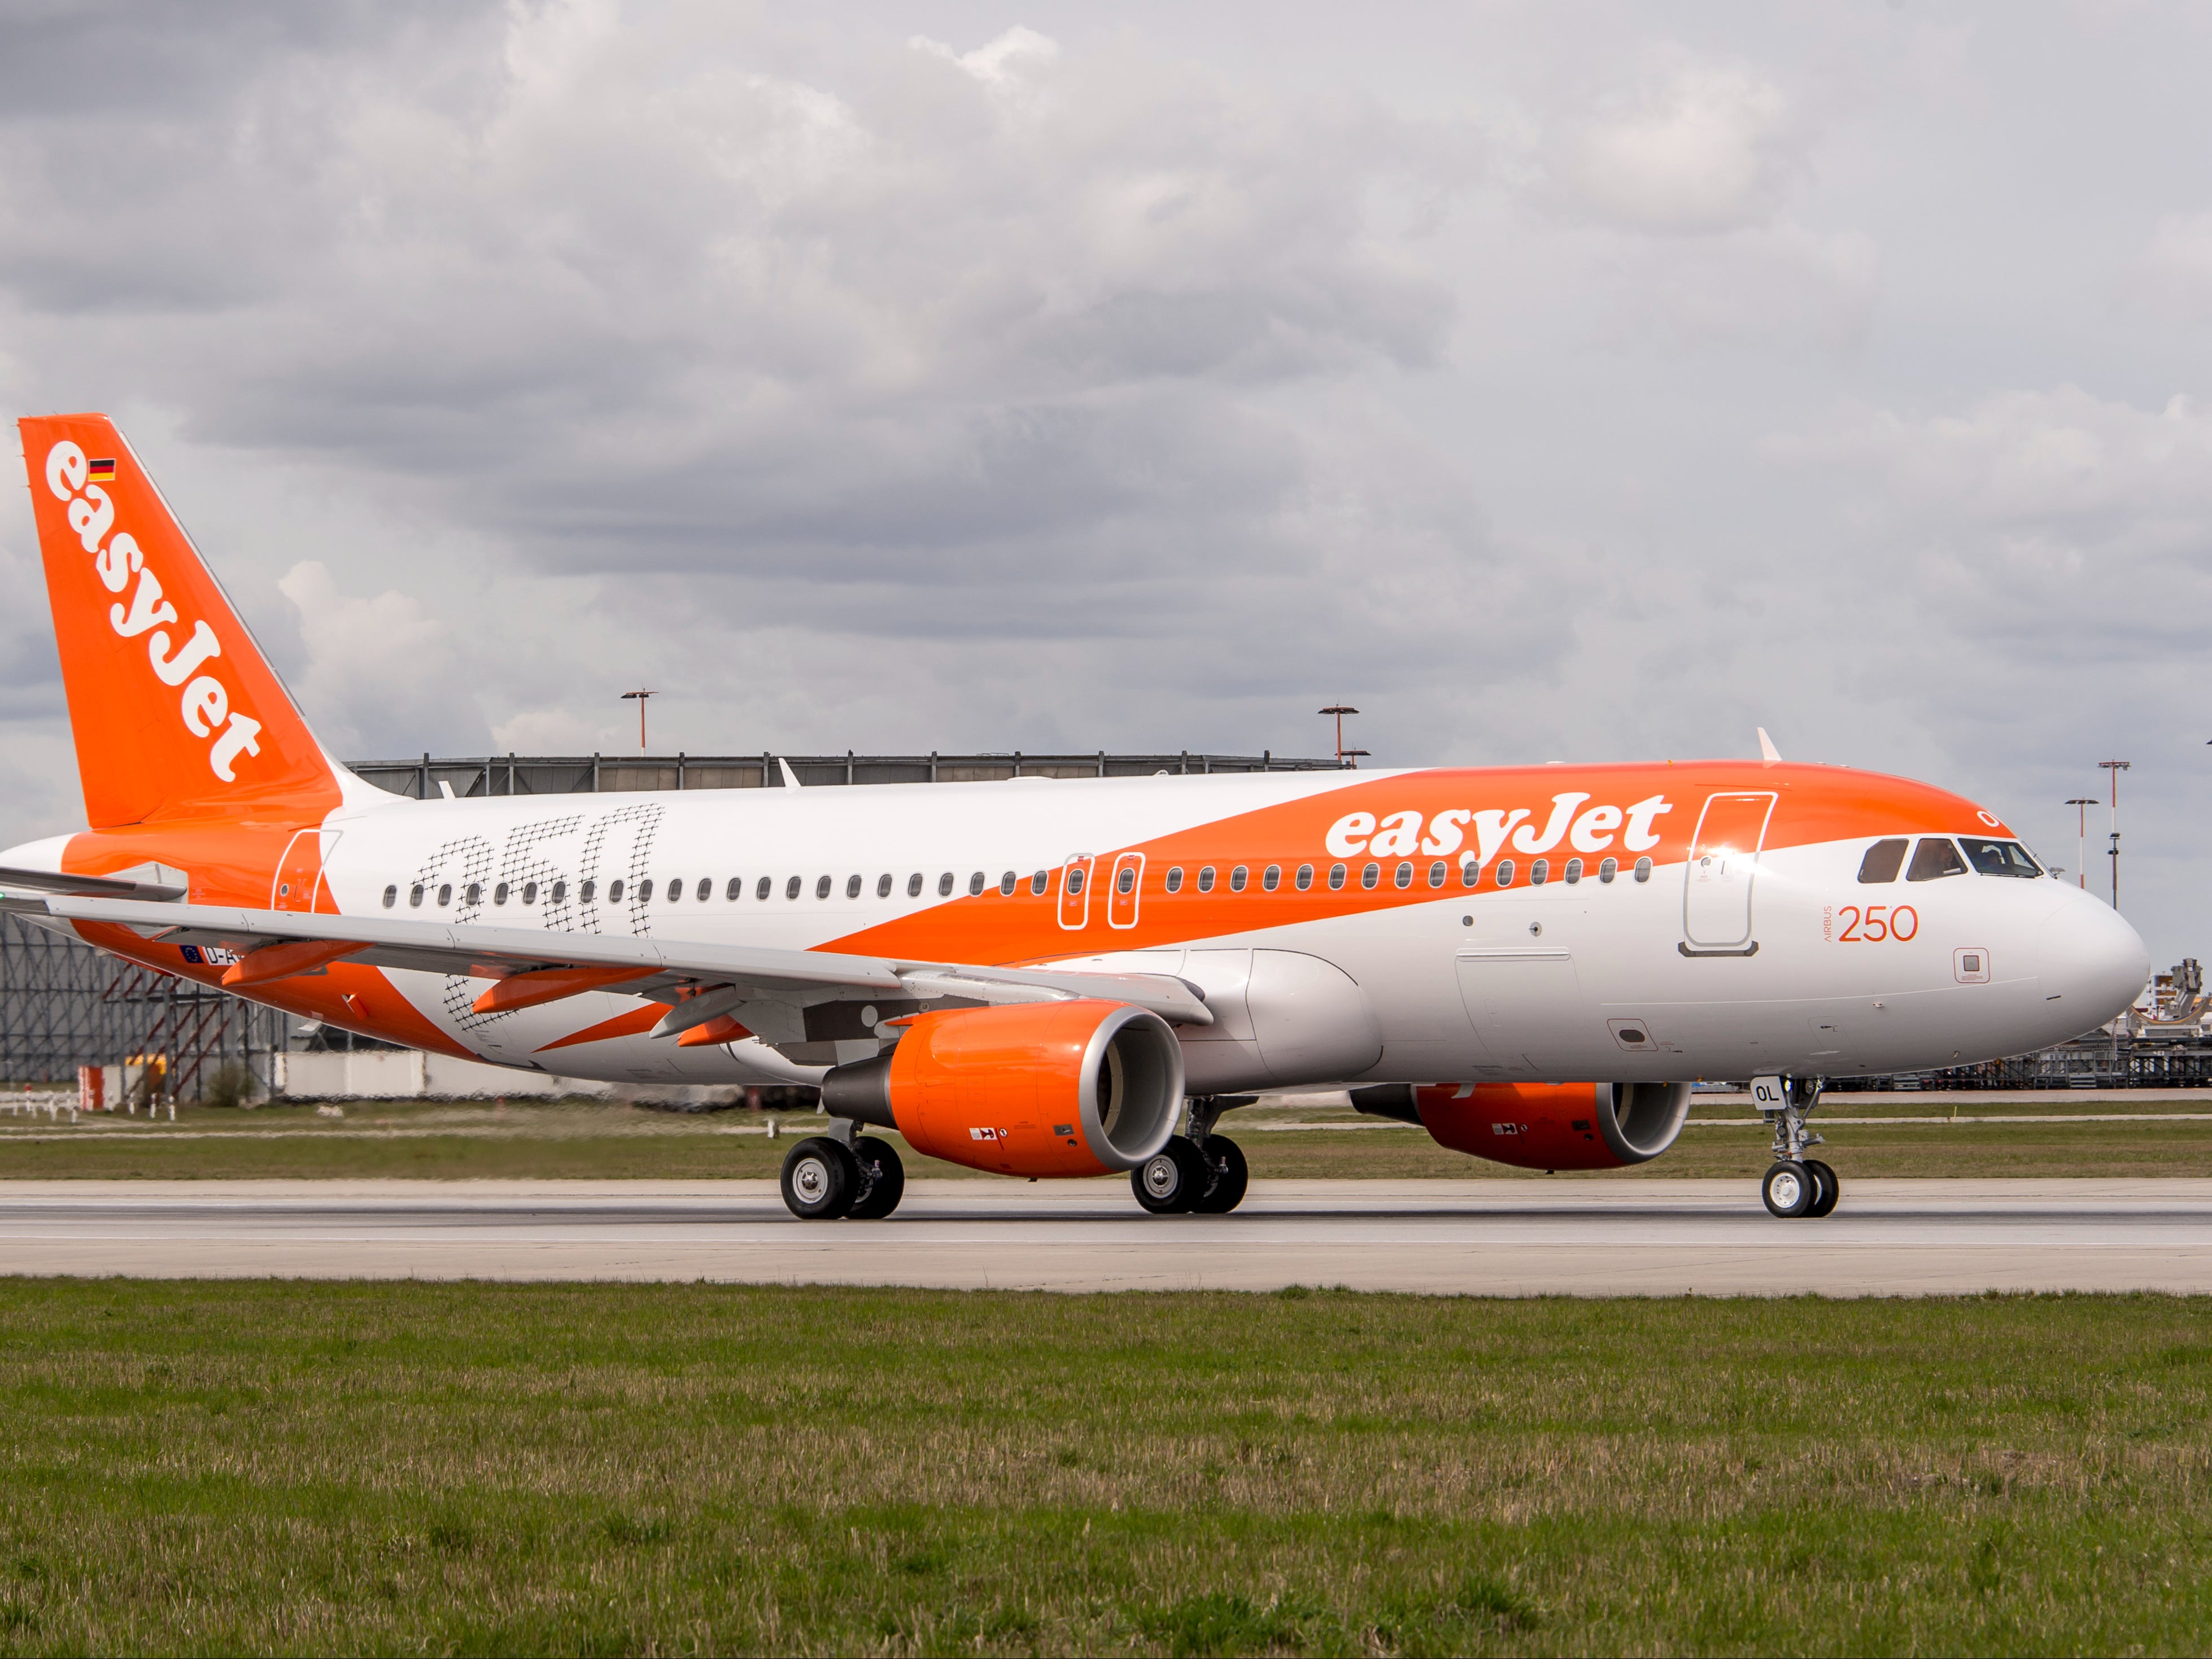 Going nowhere: an easyJet Airbus A320 at Gatwick airport, the airline’s biggest base